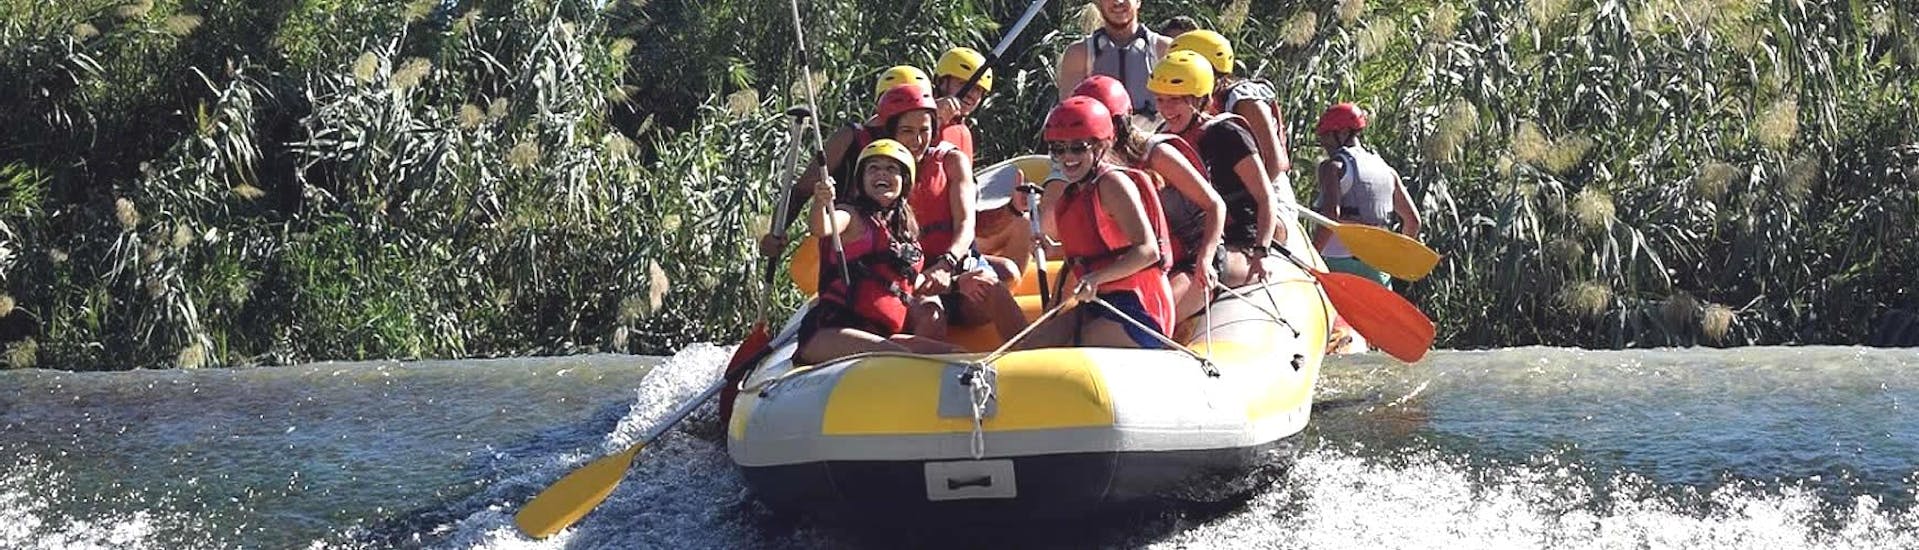 Participants of the Rafting "Classic" - Rio Segura are riding down a weir with an experienced rafting guide form Rafting Murcia.